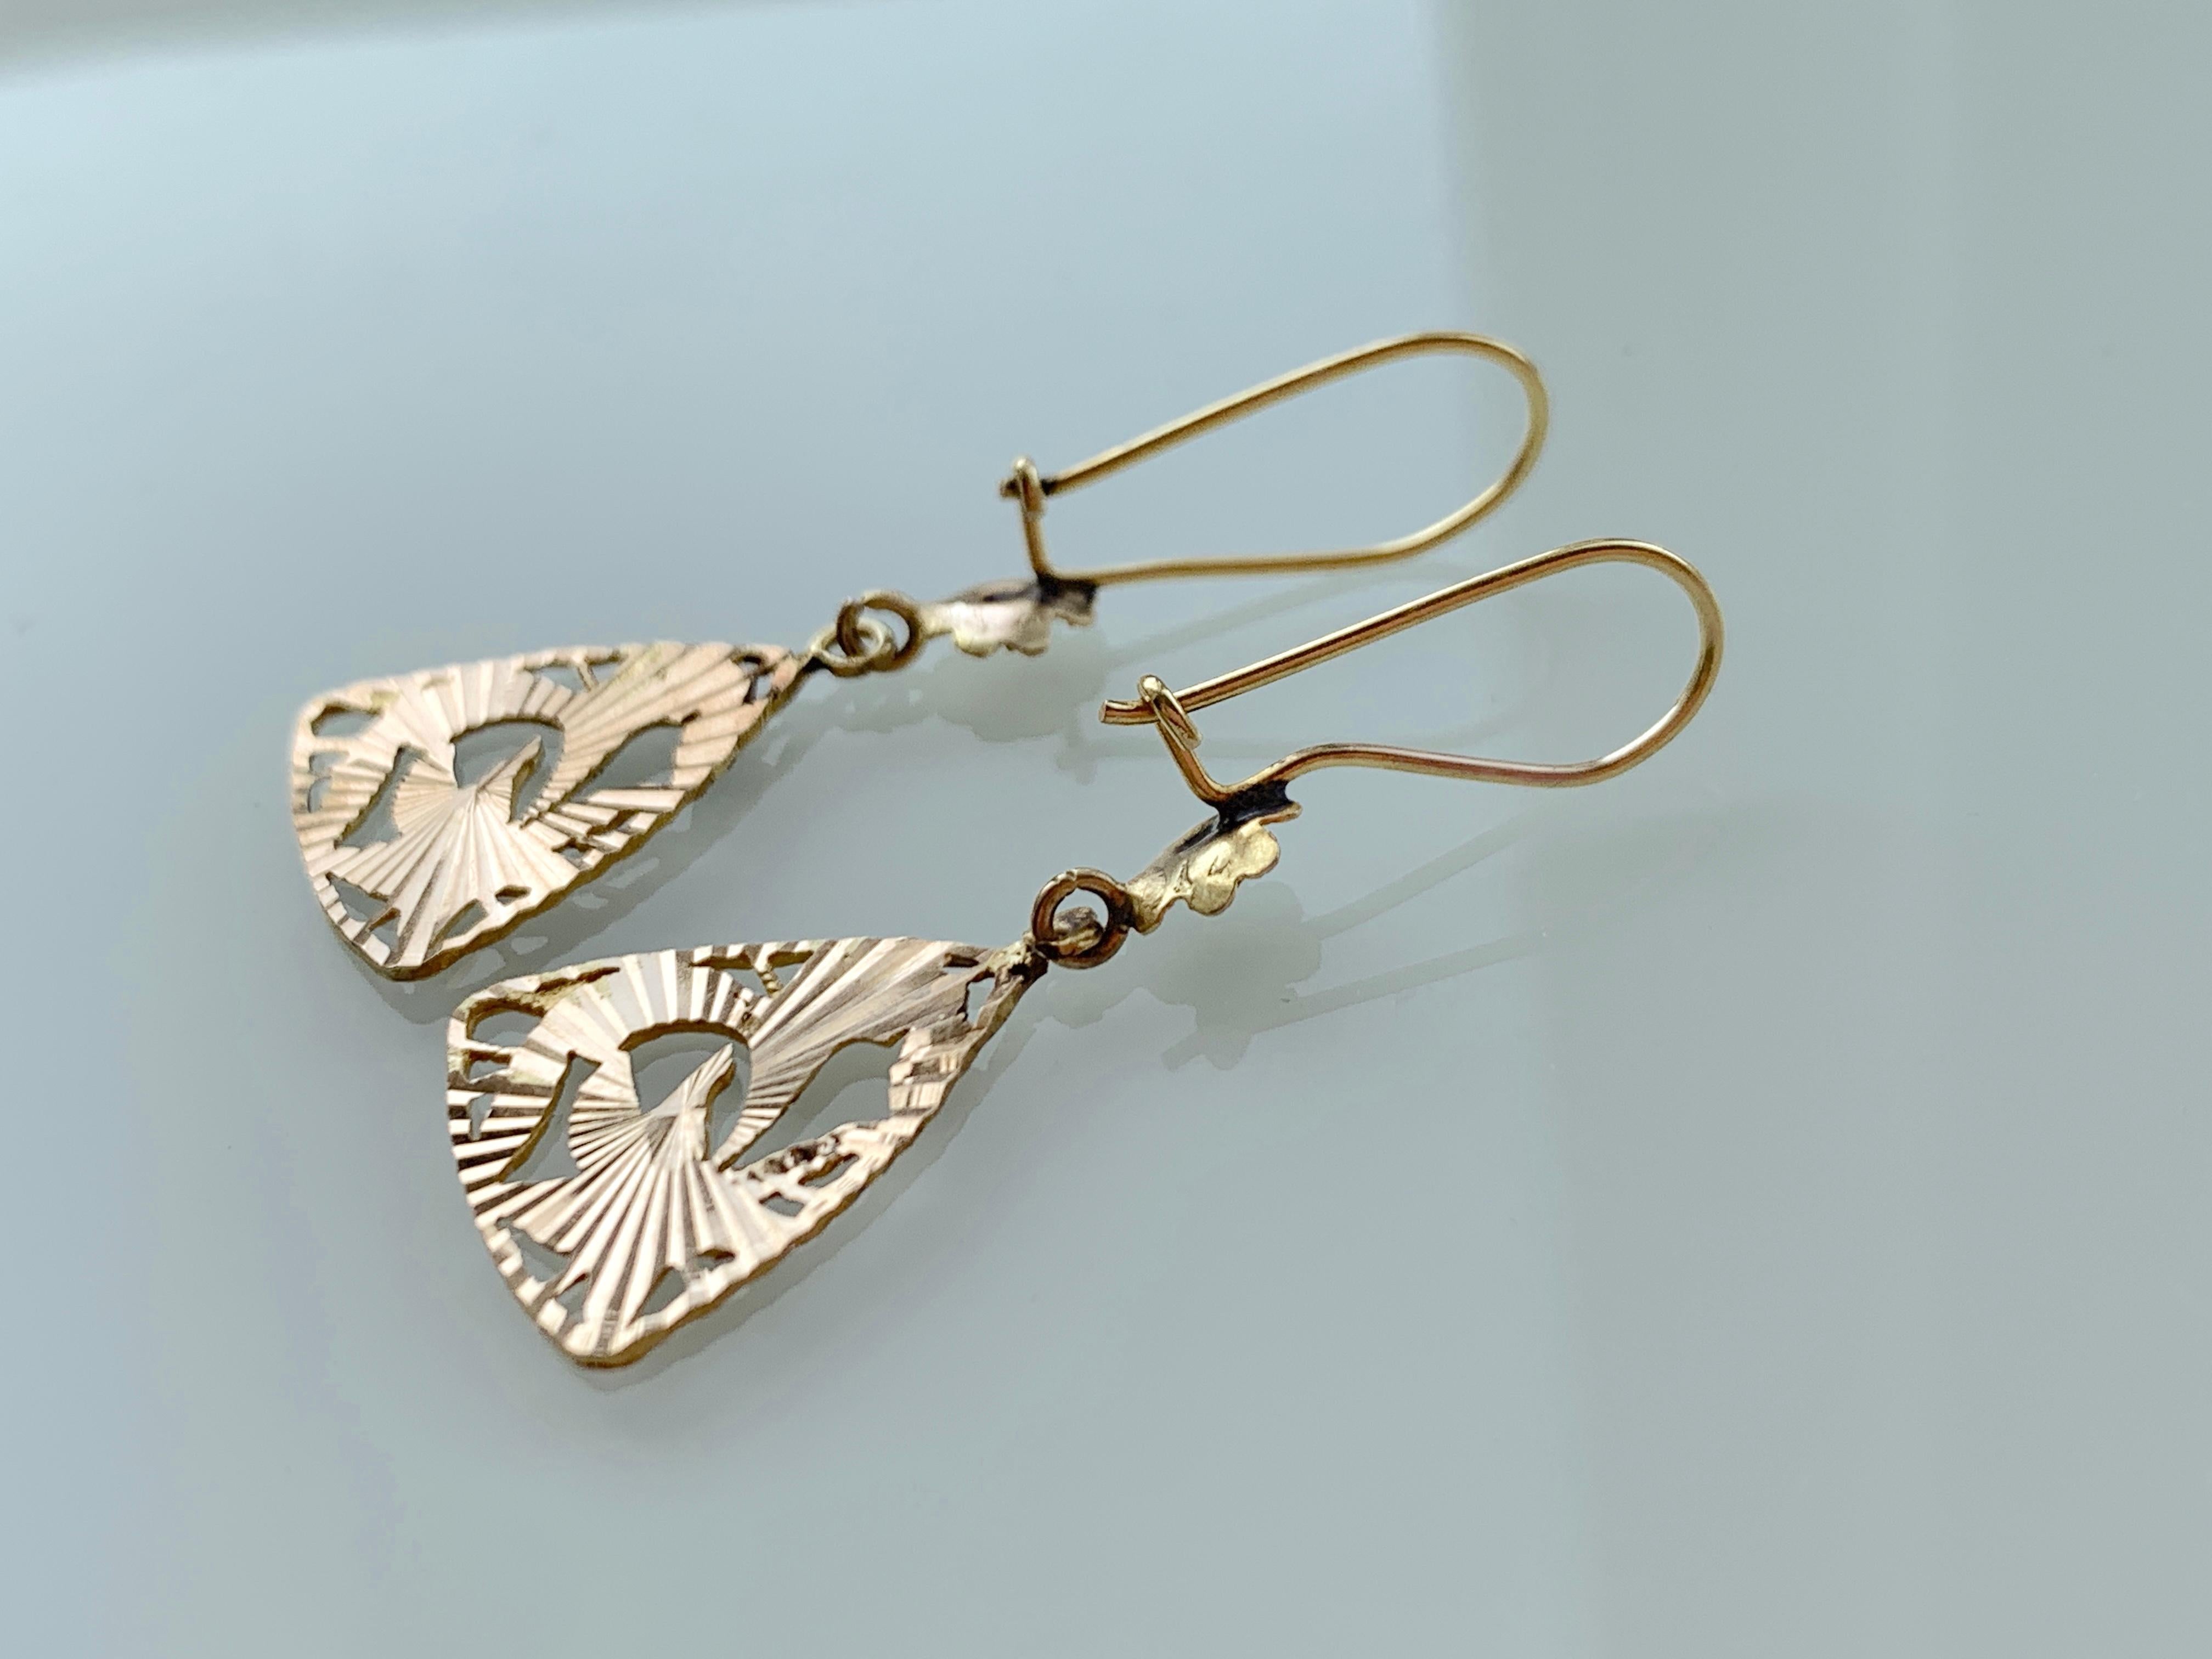 Beautiful Antique 14ct Gold Earrings
Tropical floral design 
with arose Gold finish
Light catching .